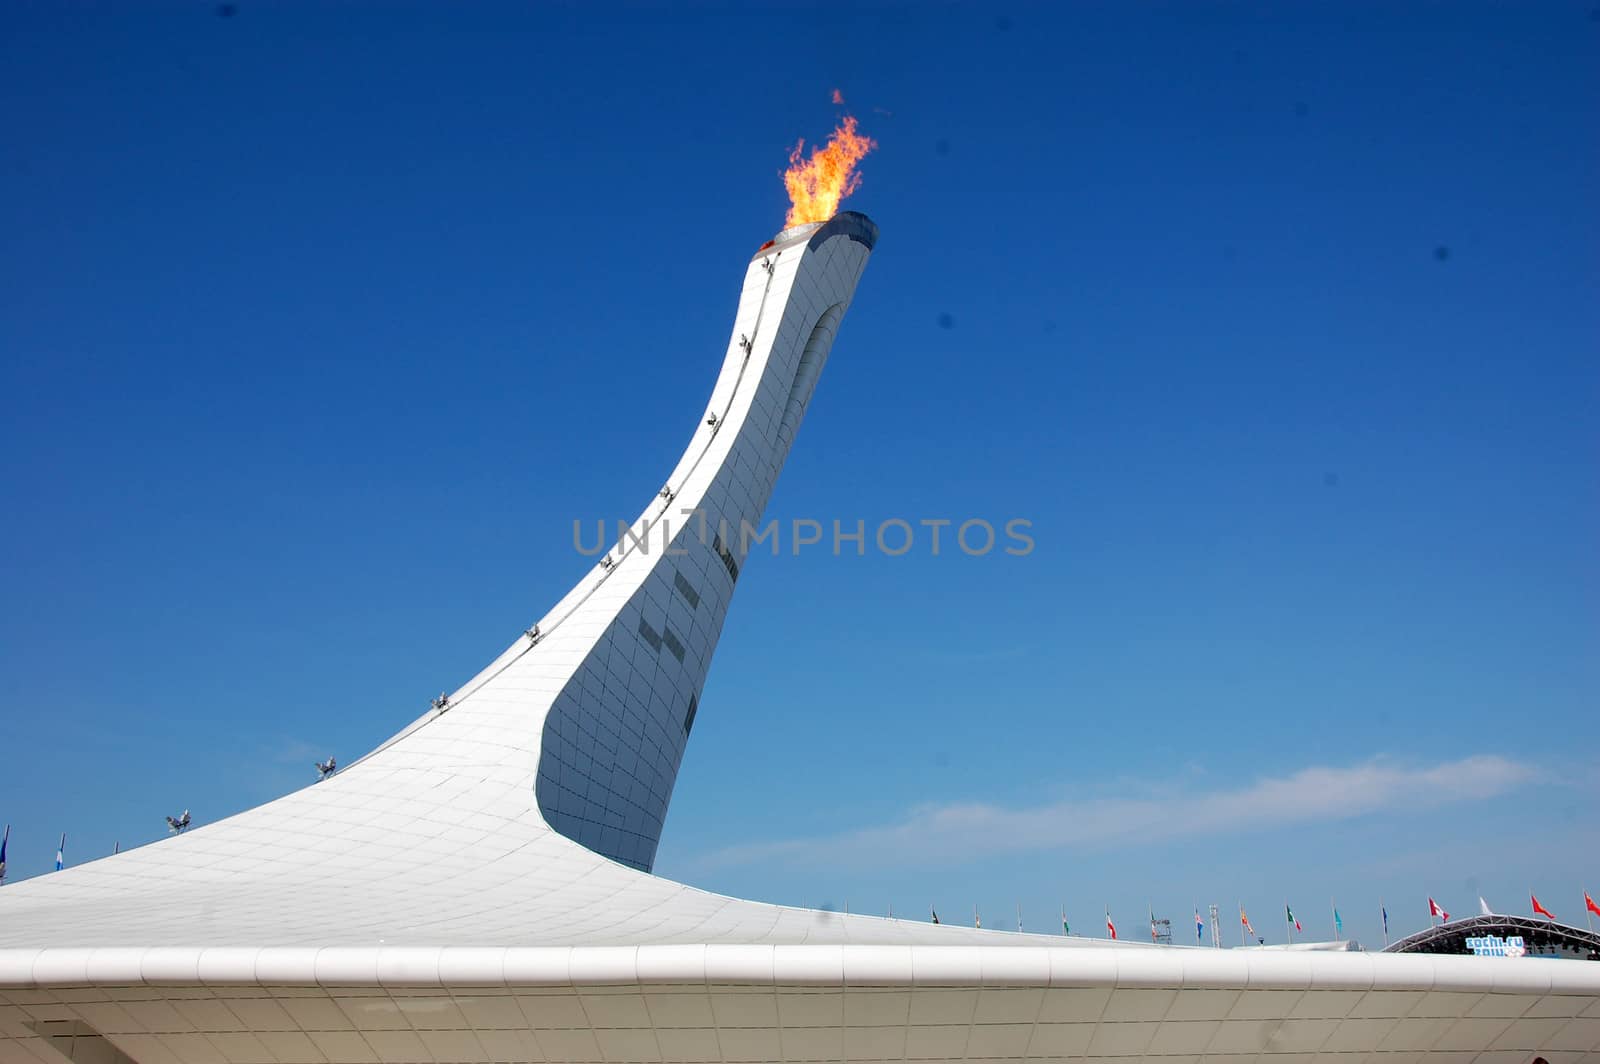 Olympic fire at XXII Winter Olympic Games Sochi 2014 by danemo